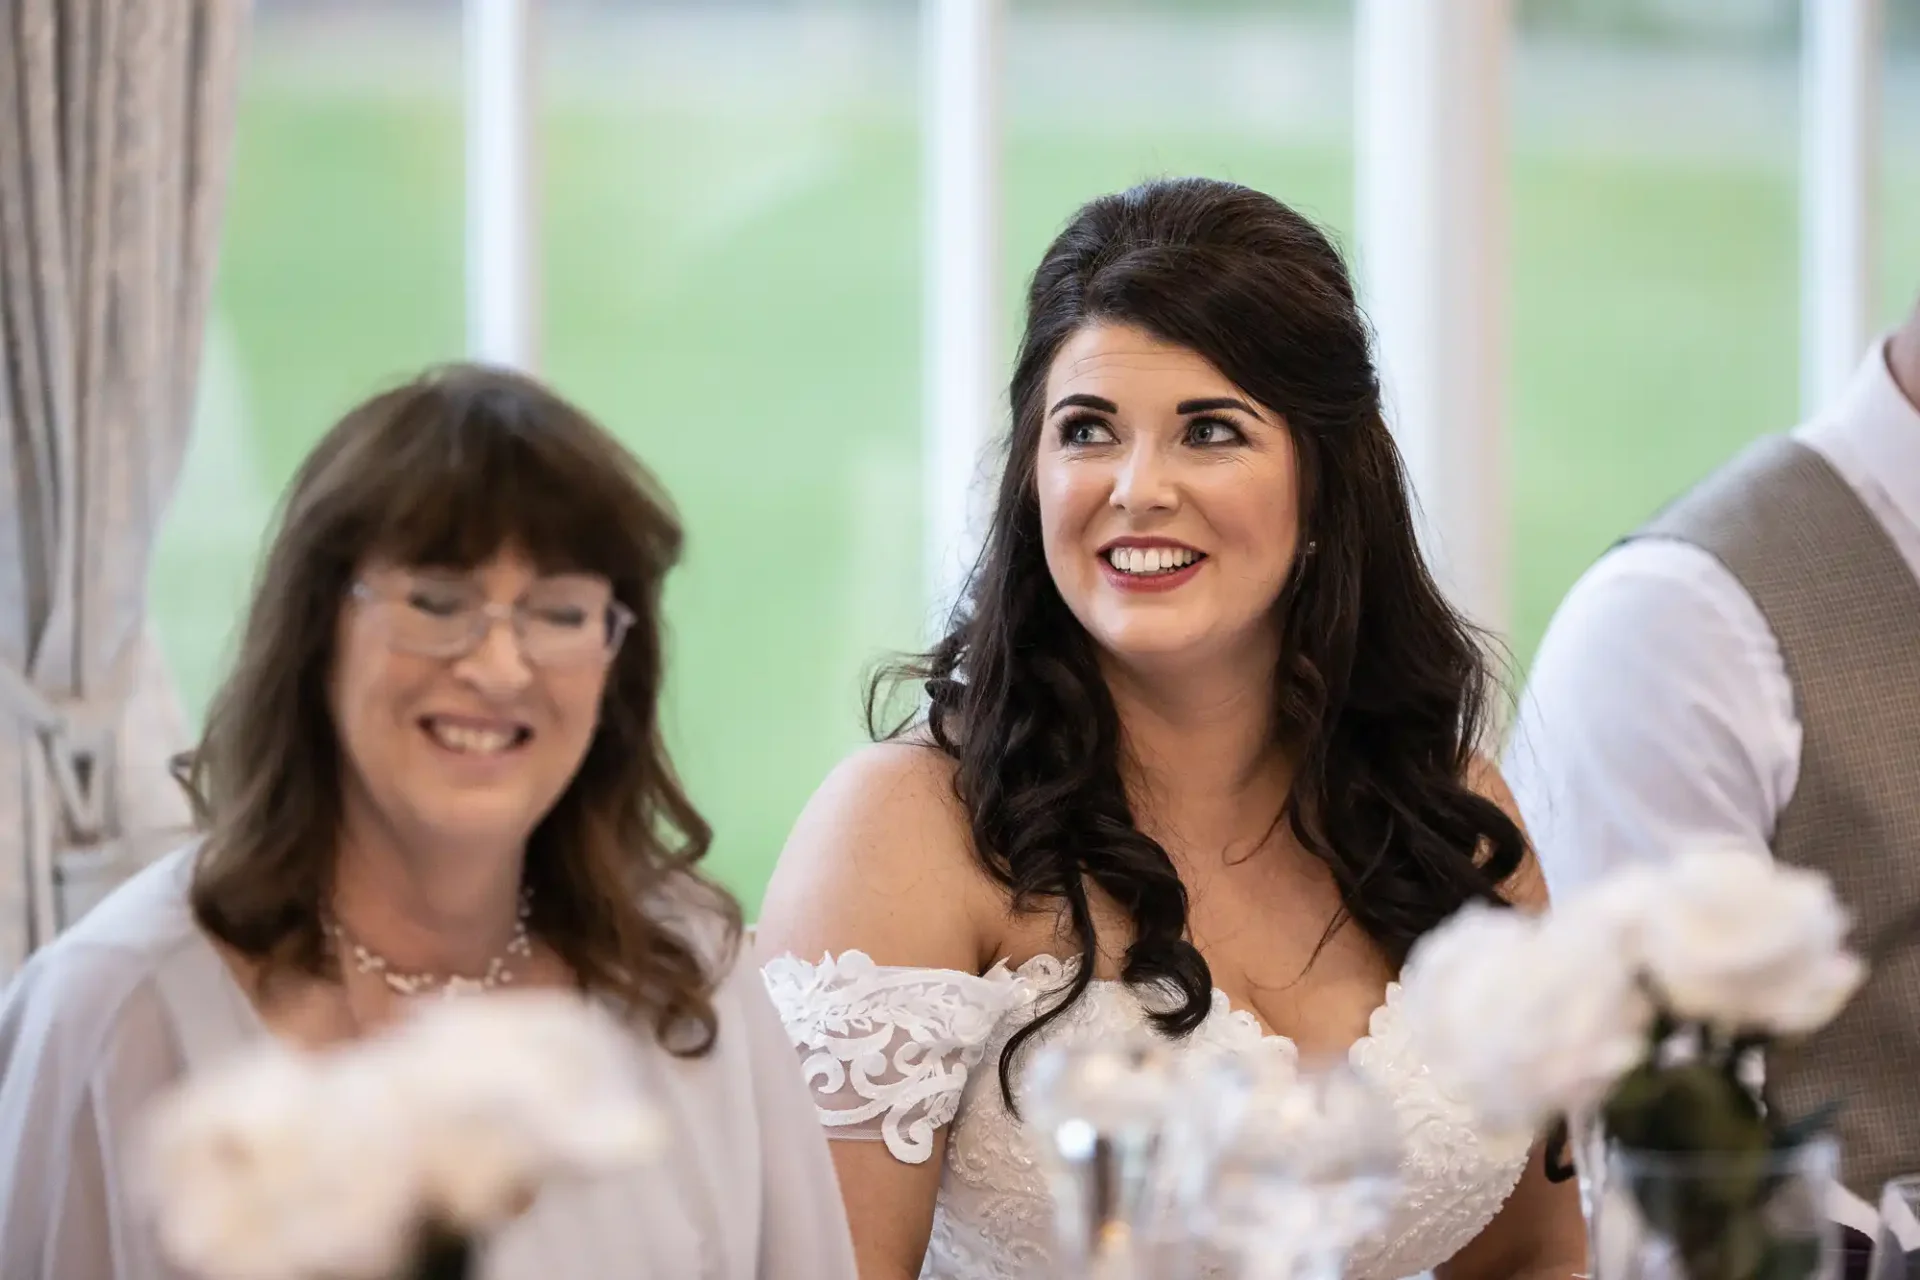 A bride smiling joyfully at a wedding reception, seated next to a woman in glasses. they are surrounded by elegant floral decorations.